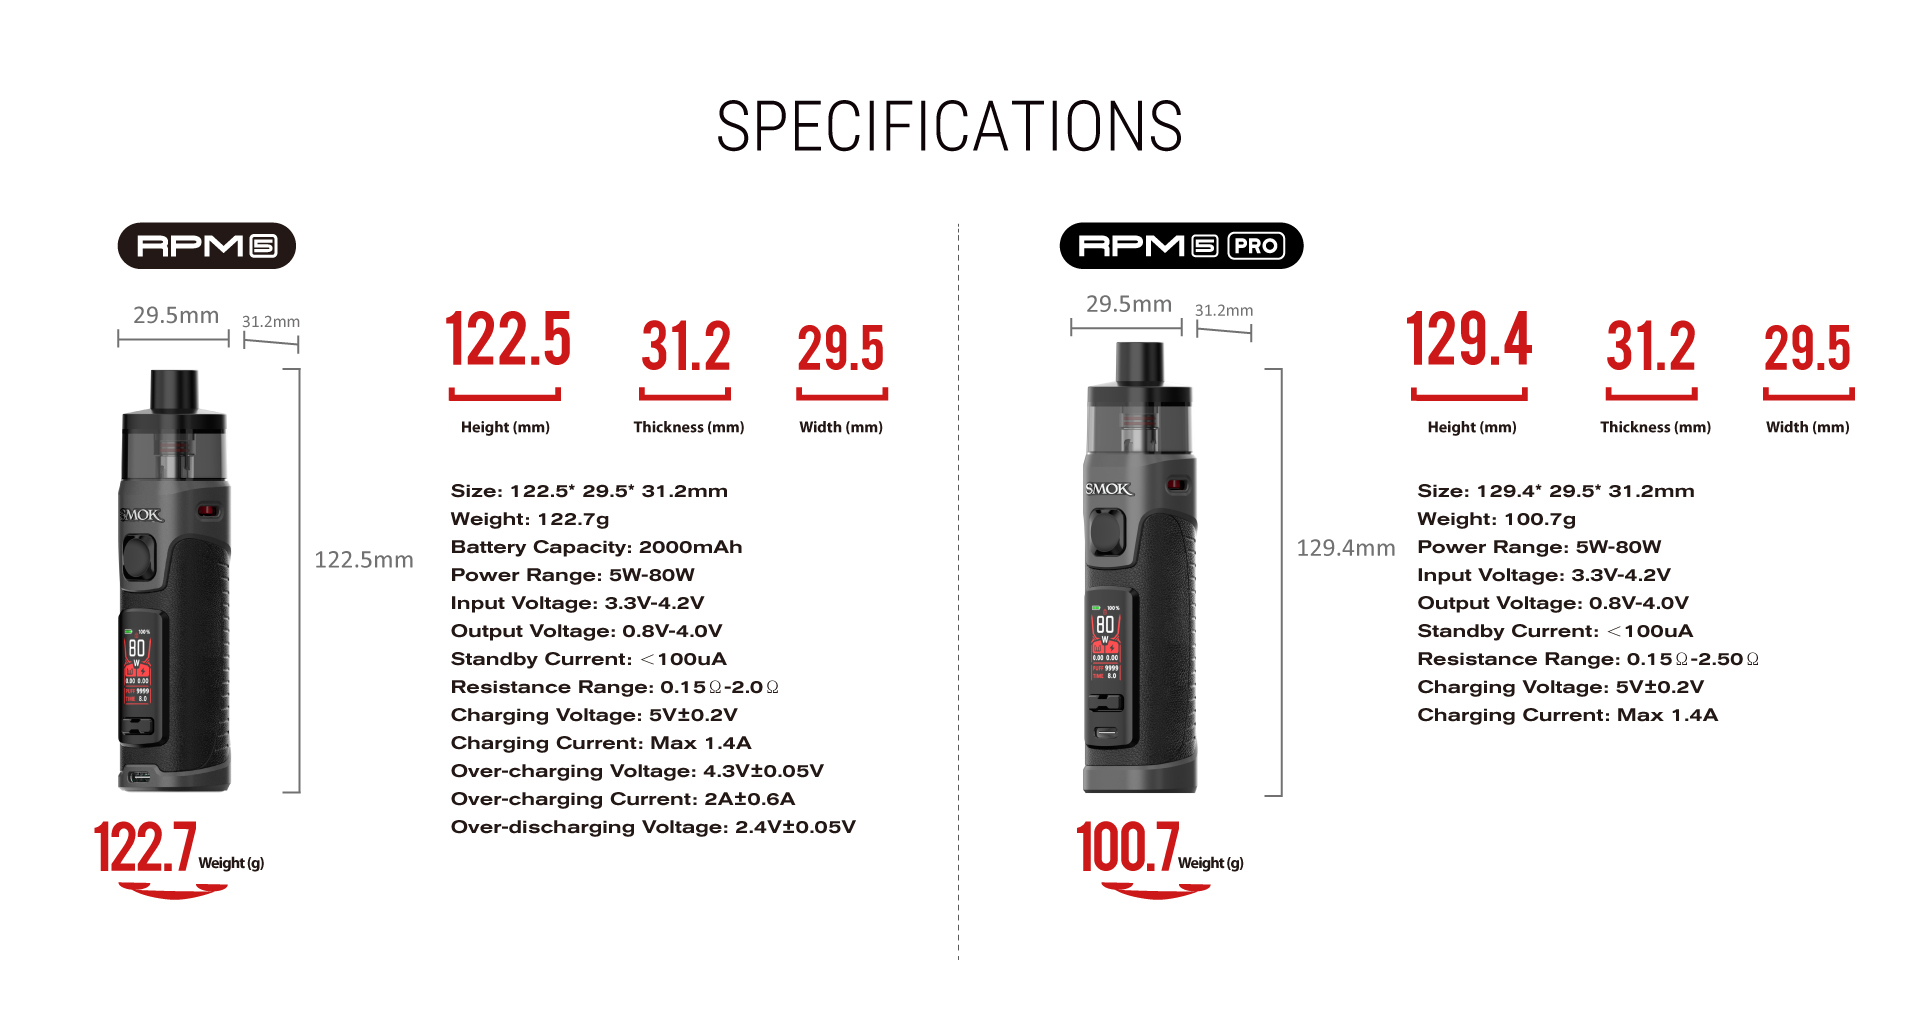 pro specification 